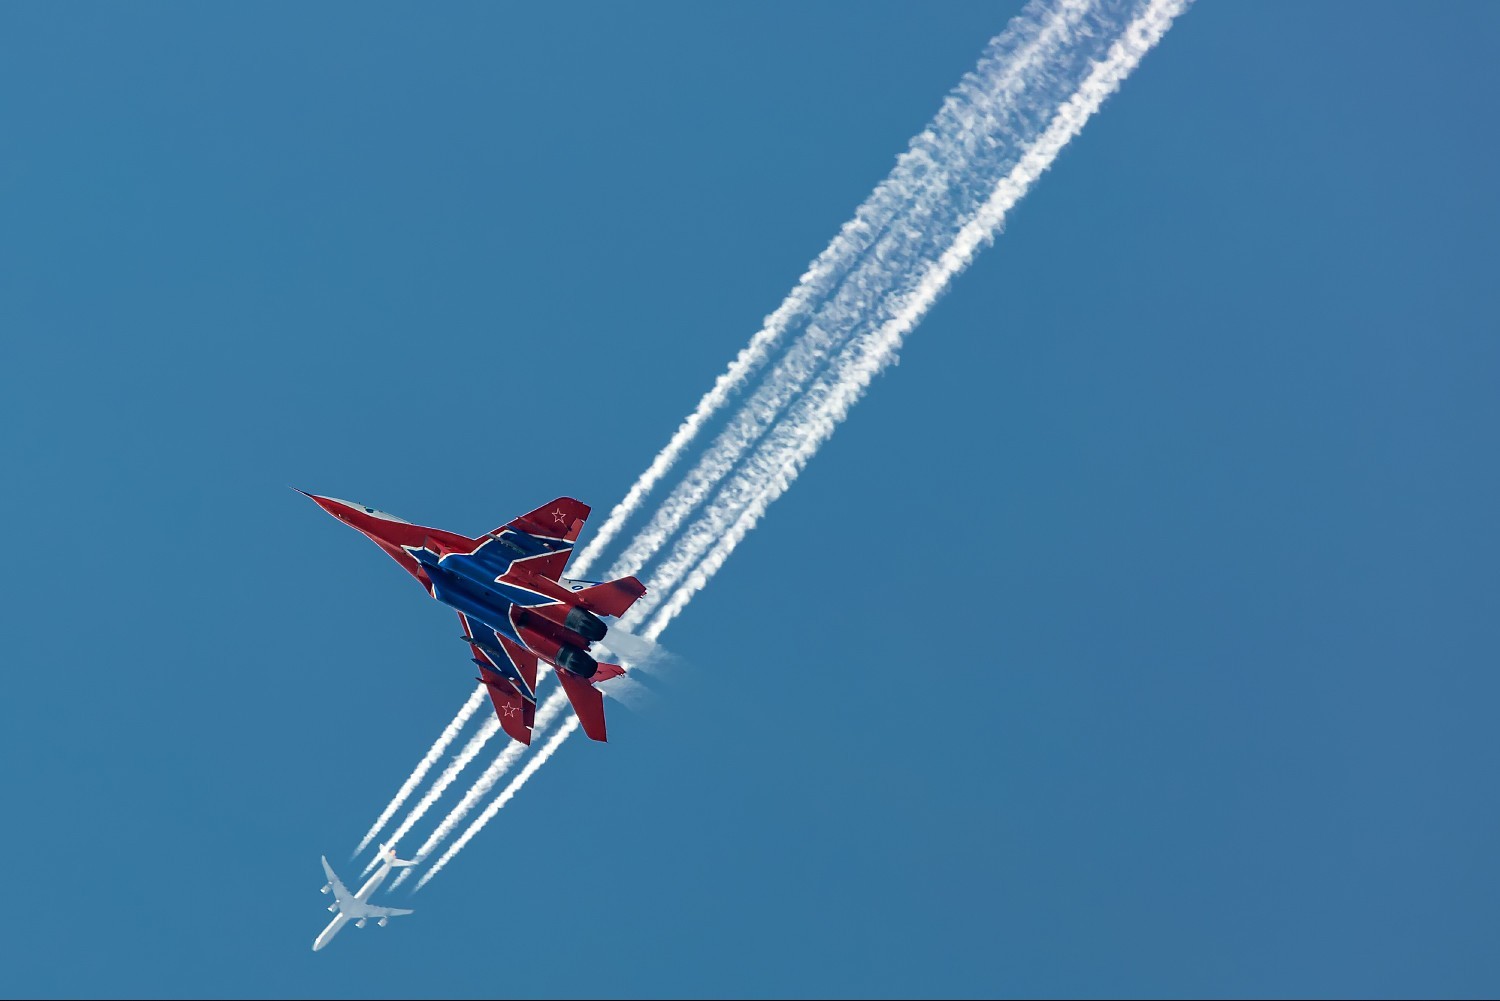 General 1500x1001 airplane aircraft sky military aircraft vehicle Mikoyan MiG-29 military vehicle passenger aircraft Russian Air Force Swifts aerobatic team contrails